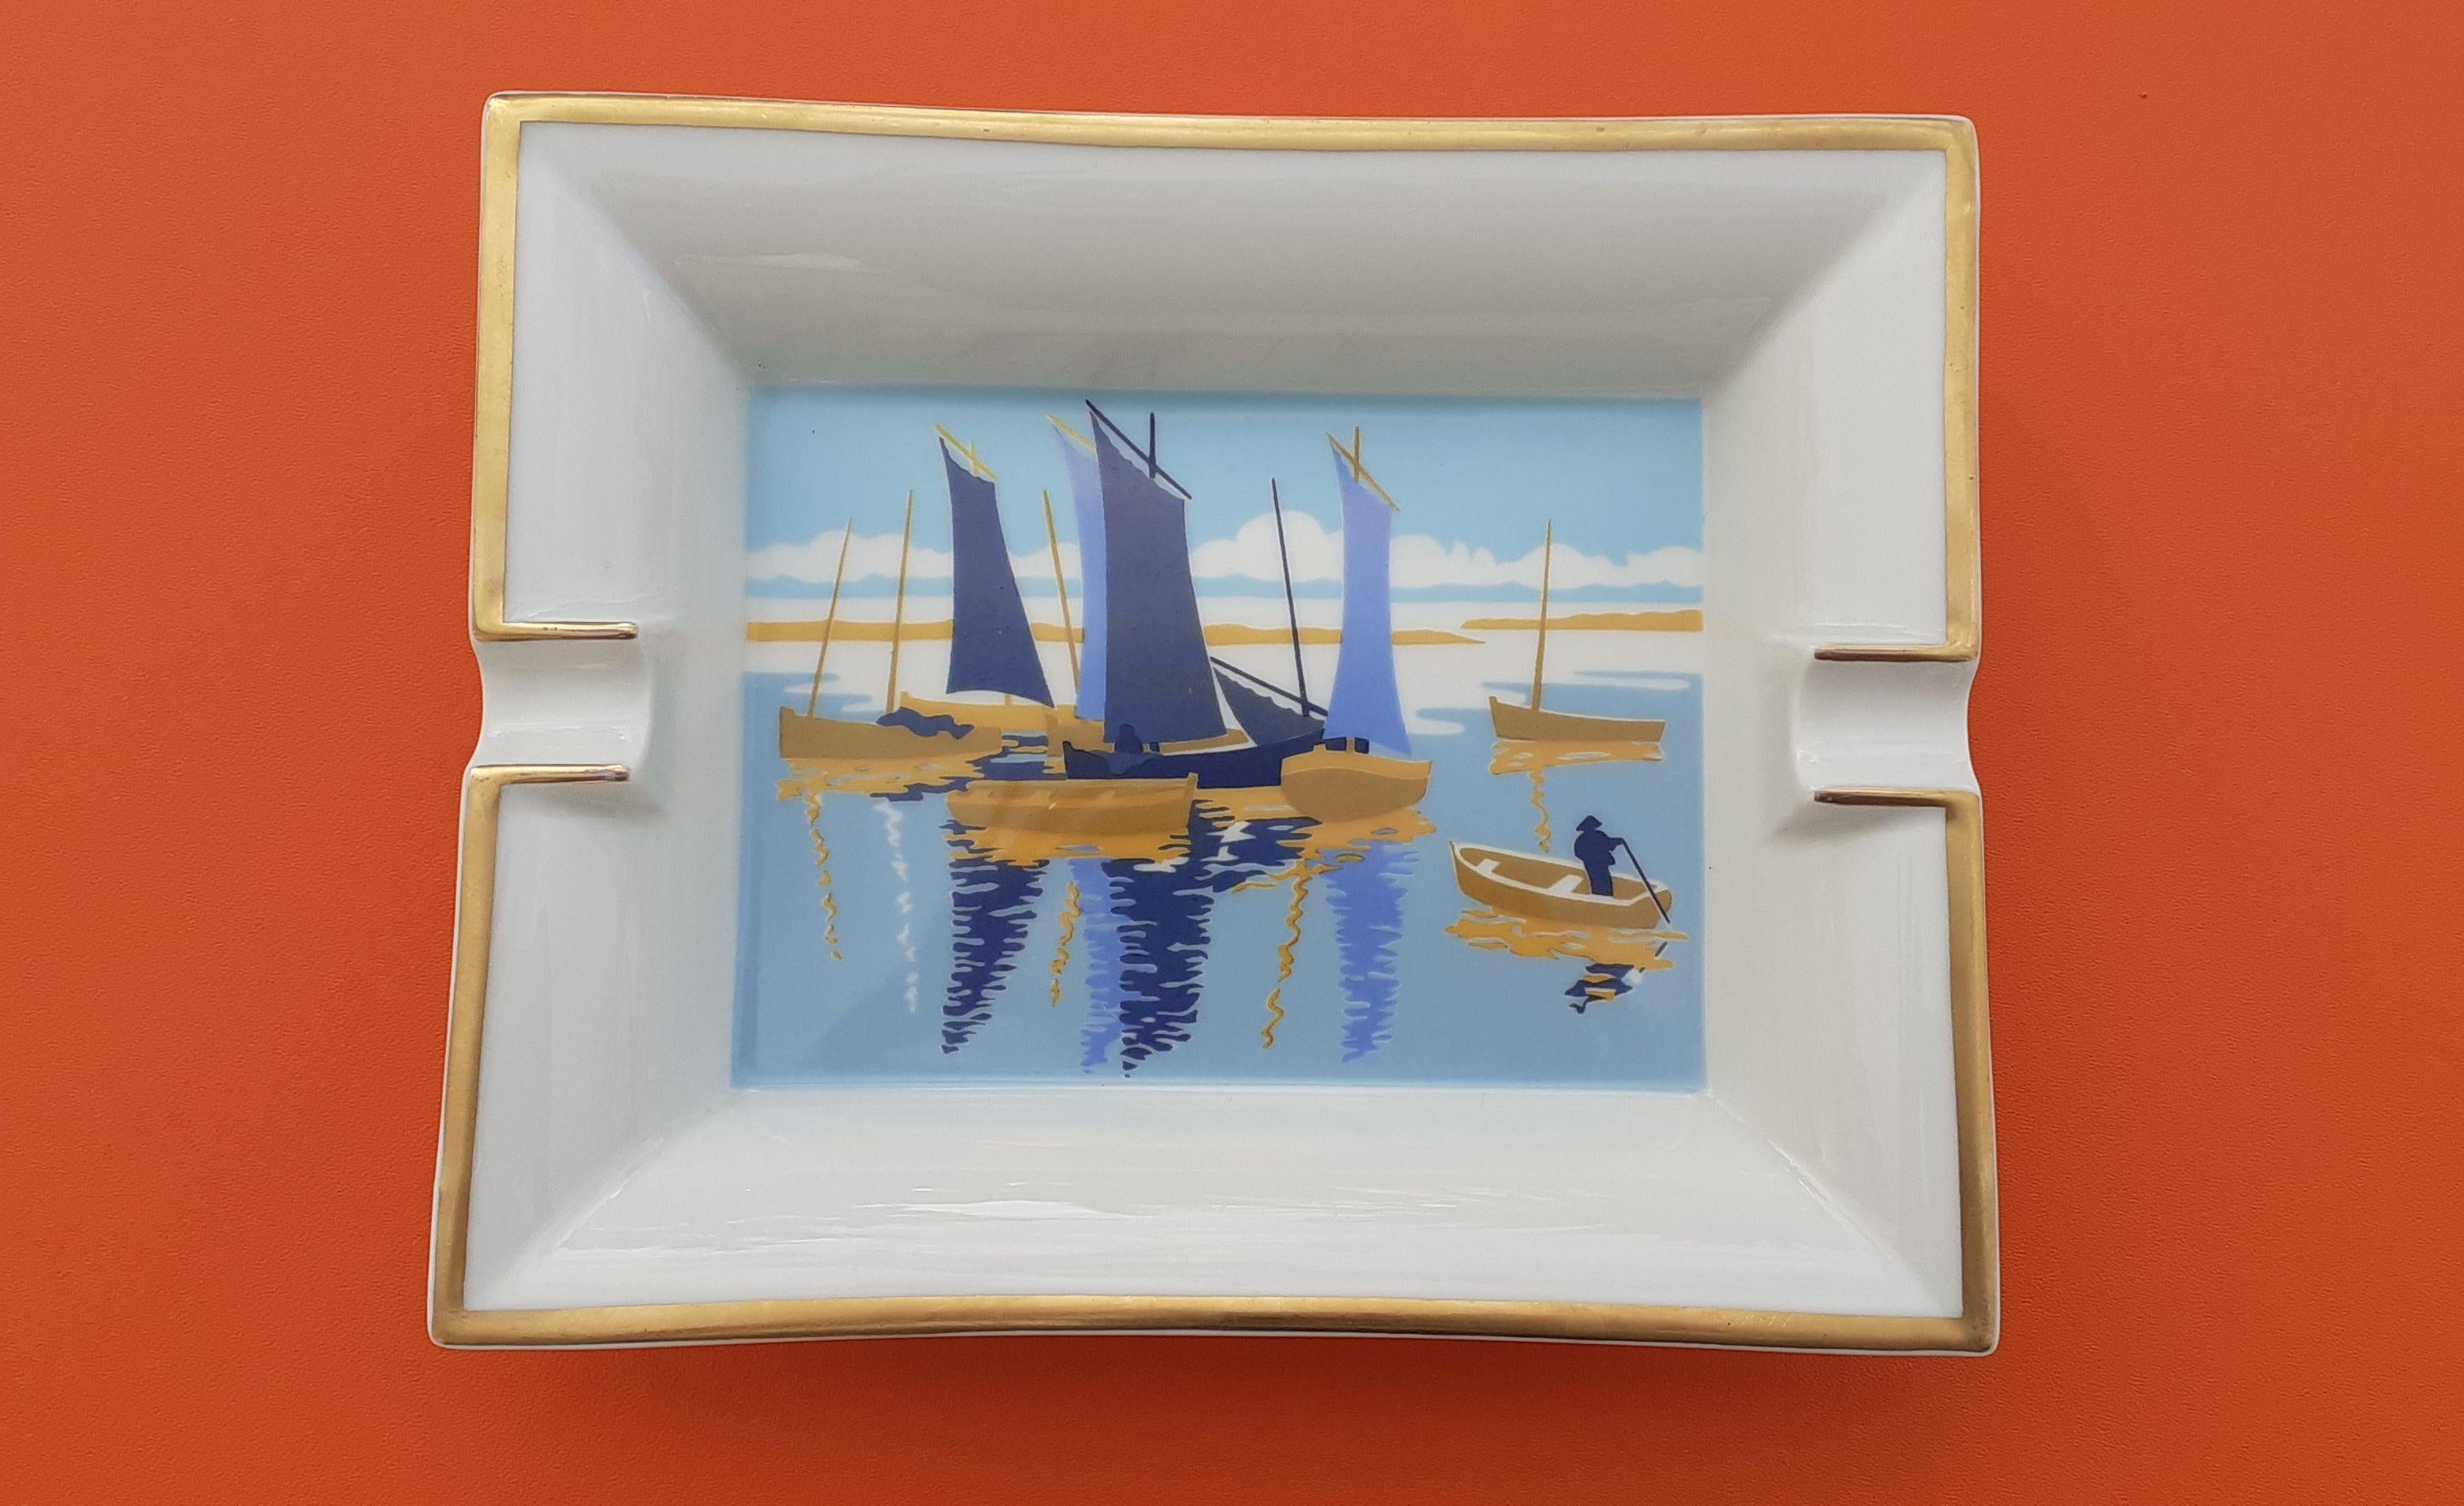 Beautiful and Rare Authentic Hermès Ashtray

Print: Small Boats / Sailing Ships

Made in France

Made of porcelain, edges gilded with fine gold

Colorways: Golden / White / Blue / Yellow

Dark suede leather at bottom

